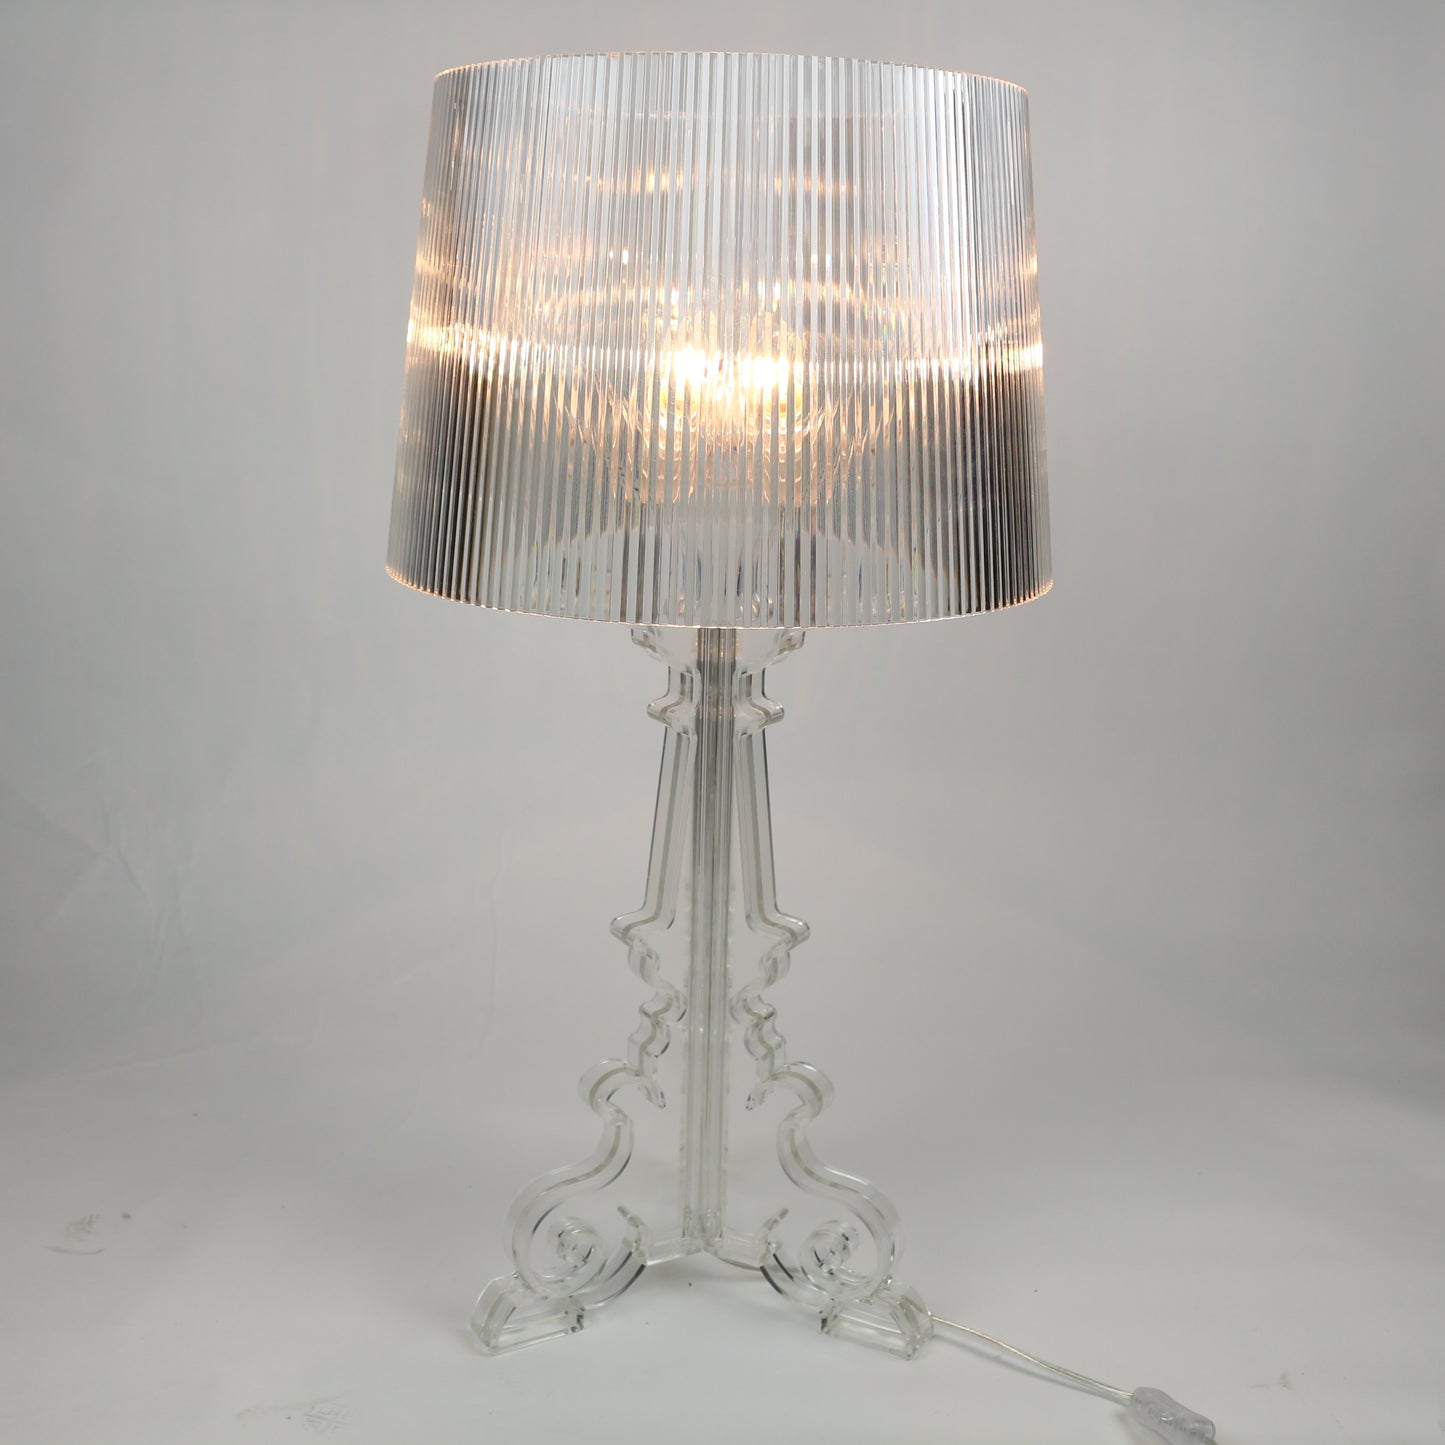 Bourgie Table Lamp smaller  sizes 2 colors available now